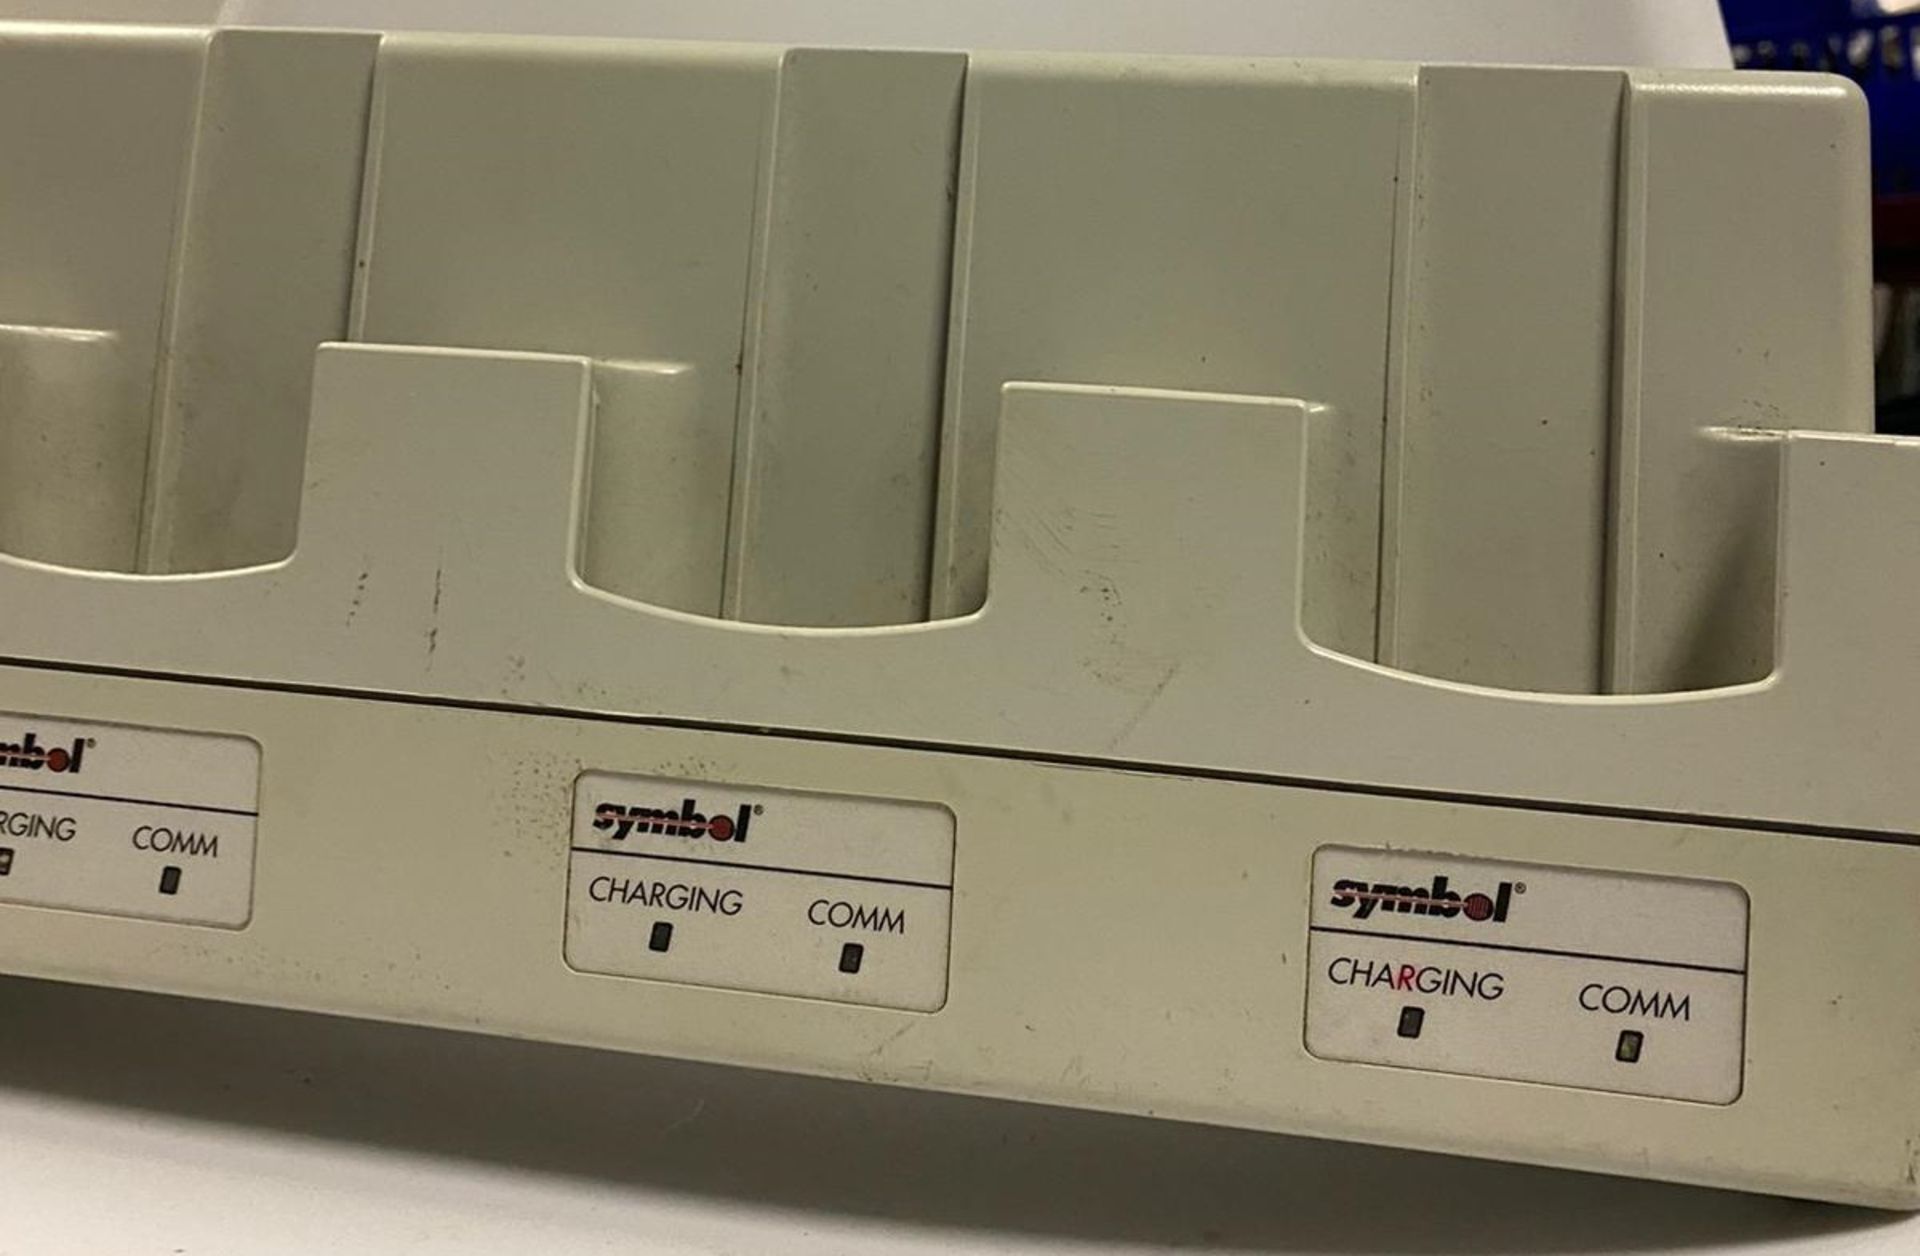 2 x Symbol Quad Slot Charging Cradles for PDT 3100 - Used Condition - Location: Altrincham WA14 - - Image 7 of 7